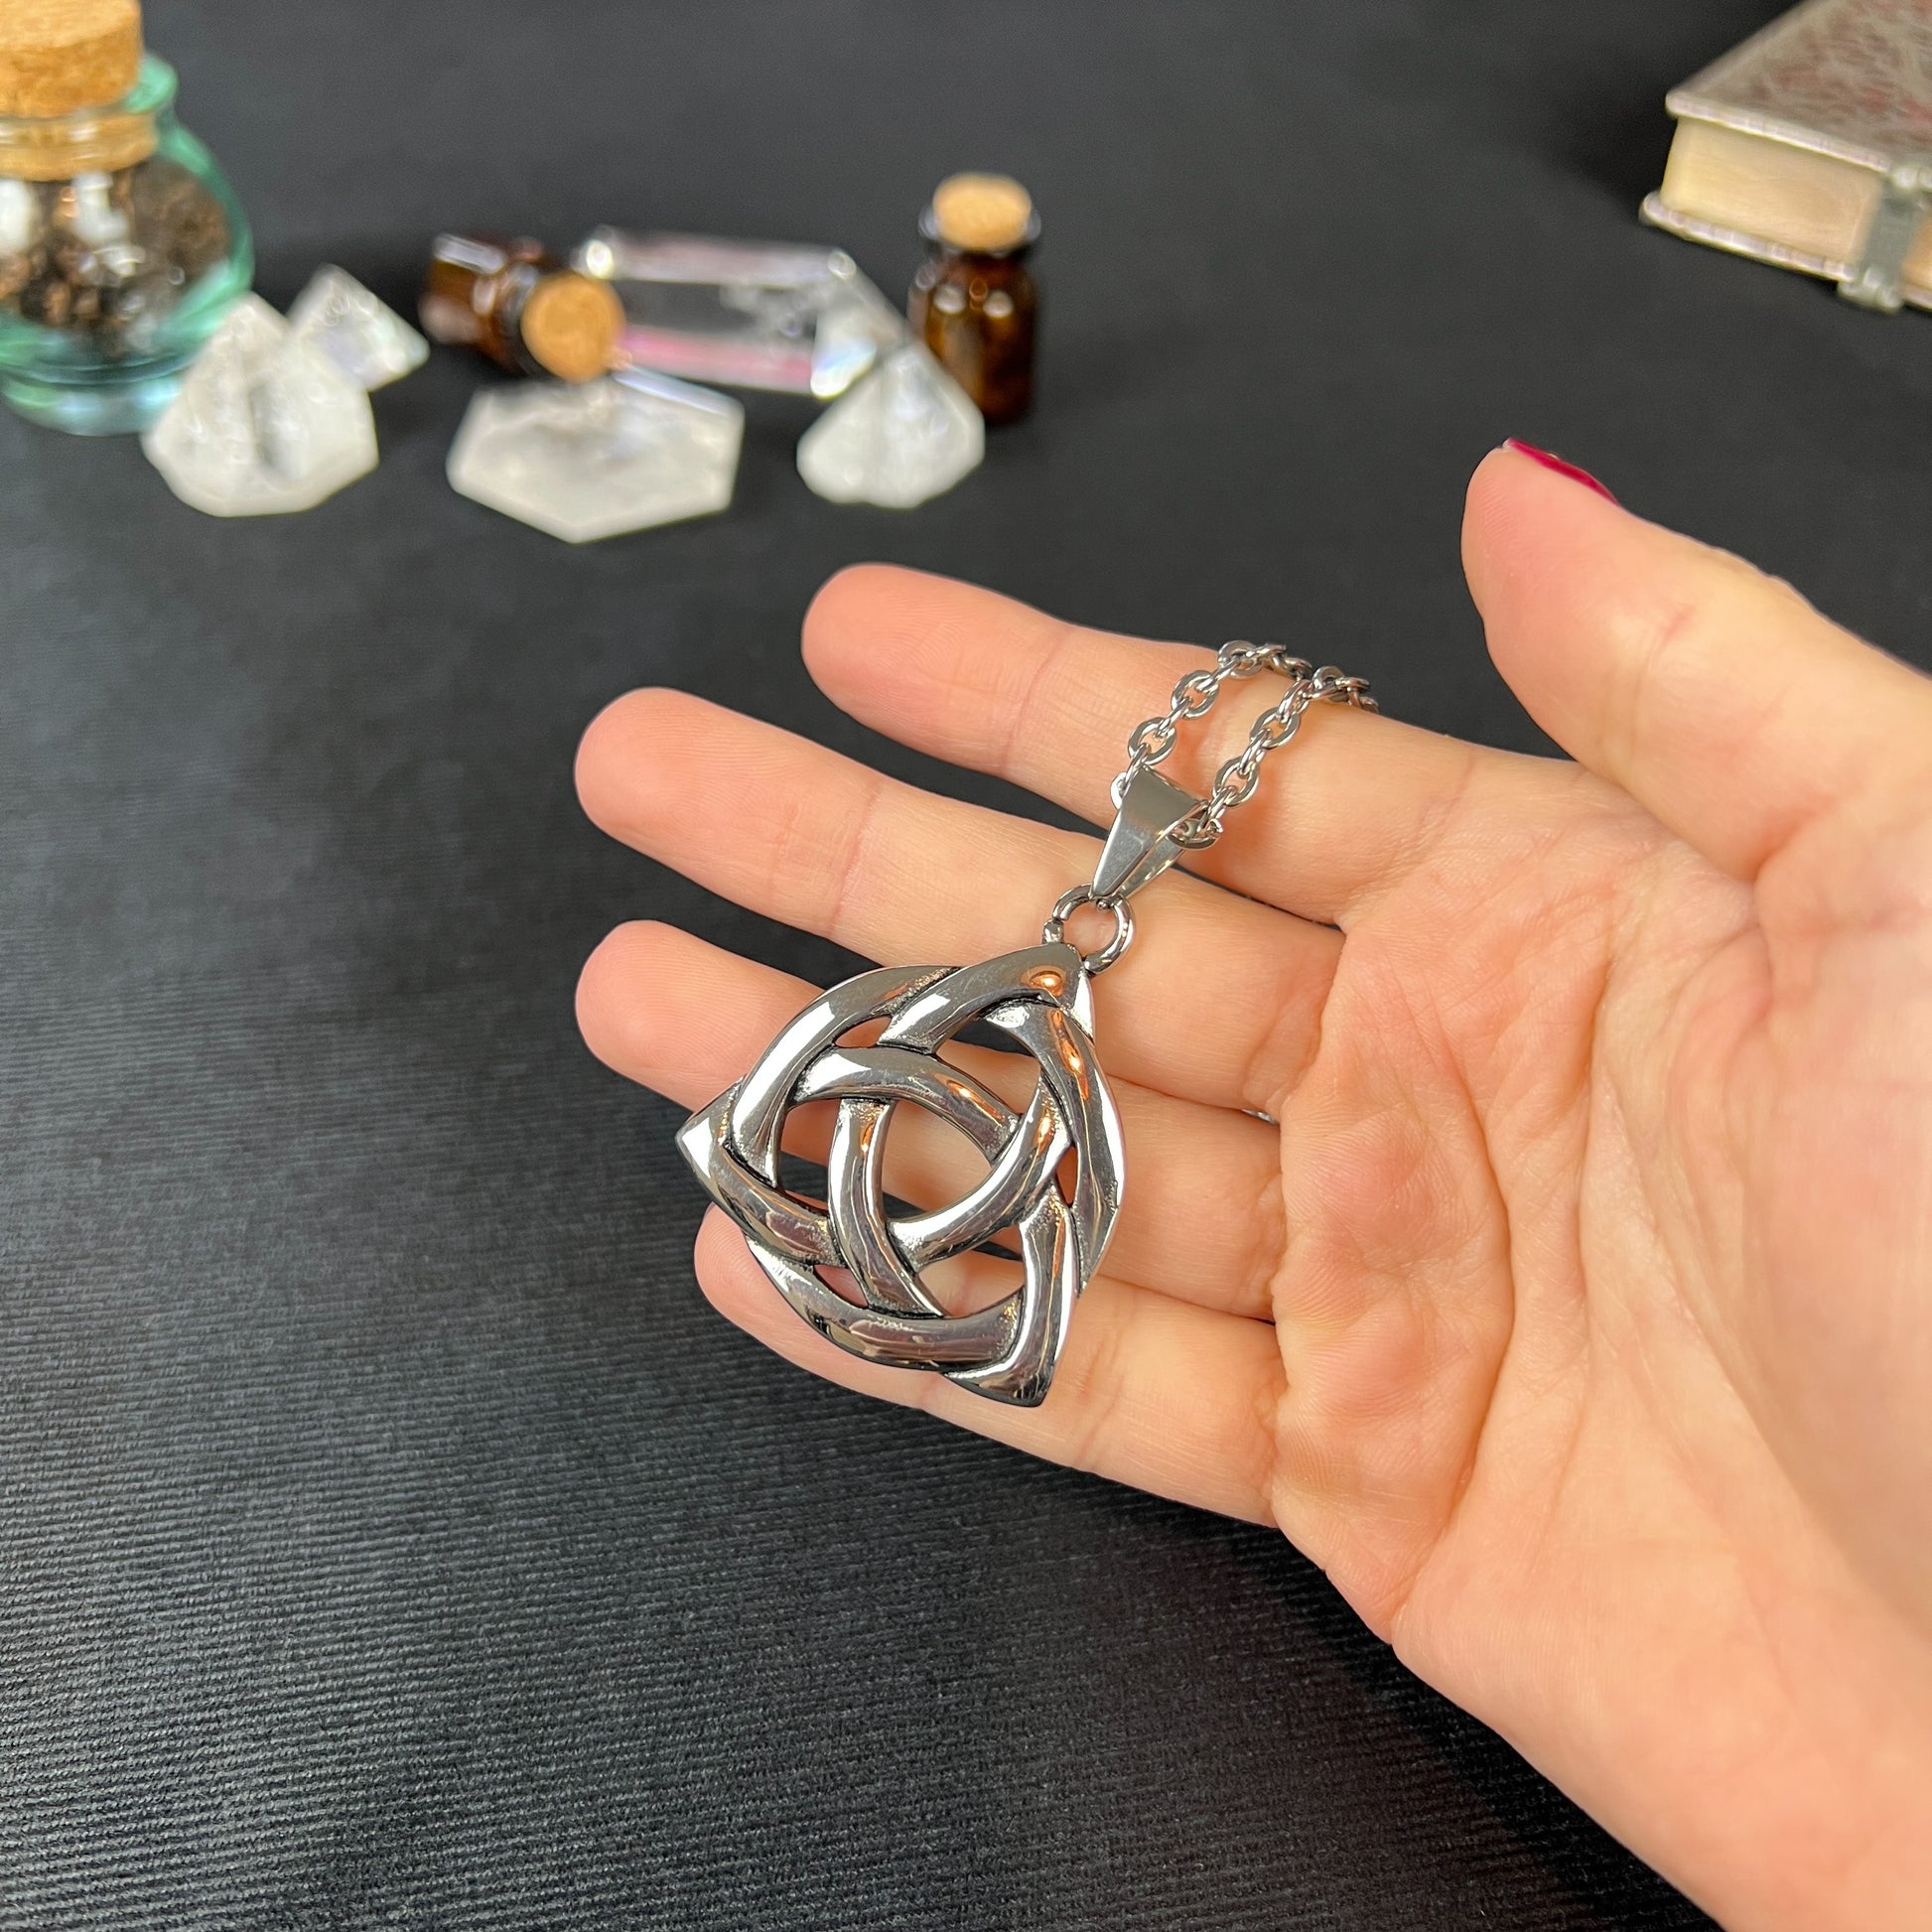 Triquetra necklace made of stainless steel pagan celtic knot necklace wiccan witch spiritual occult necklace